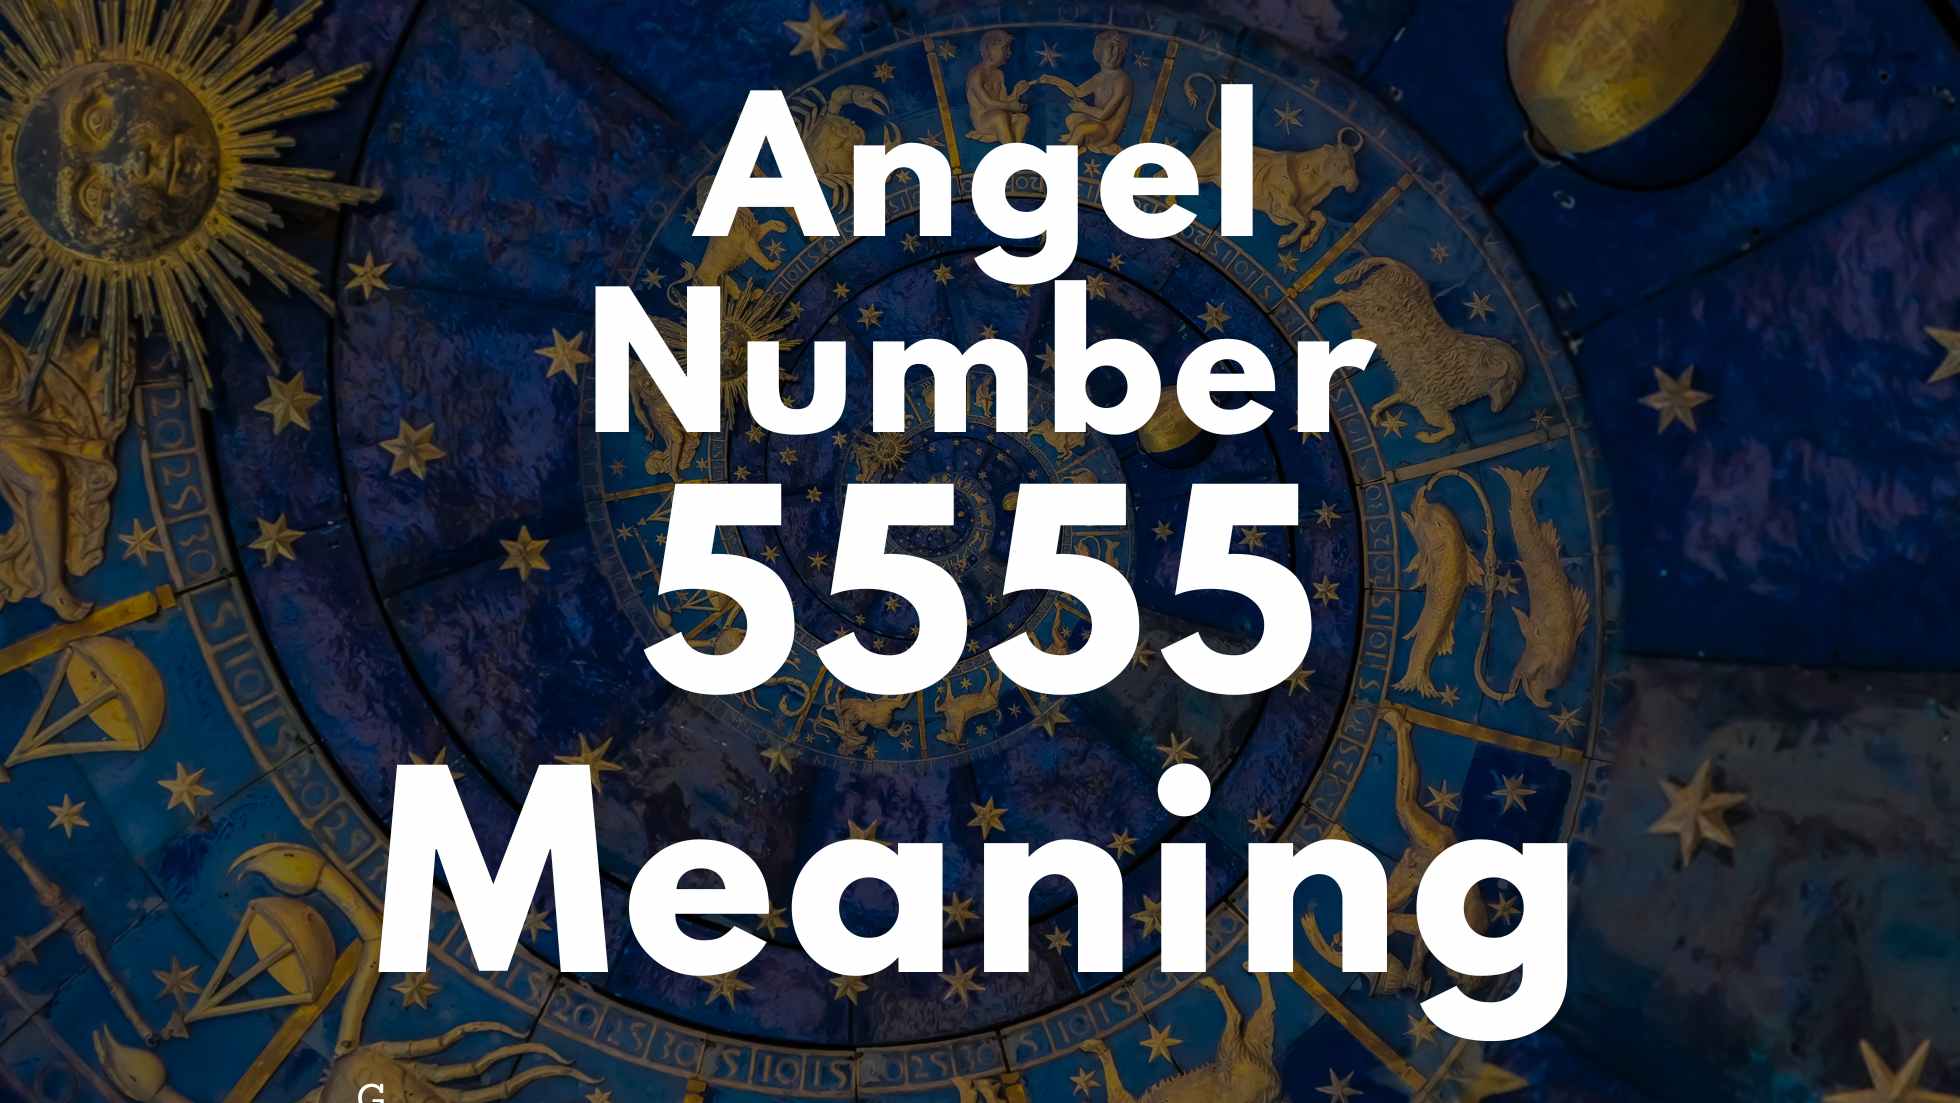 Angel Number 5555 Spiritual Meaning, Symbolism, and Significance